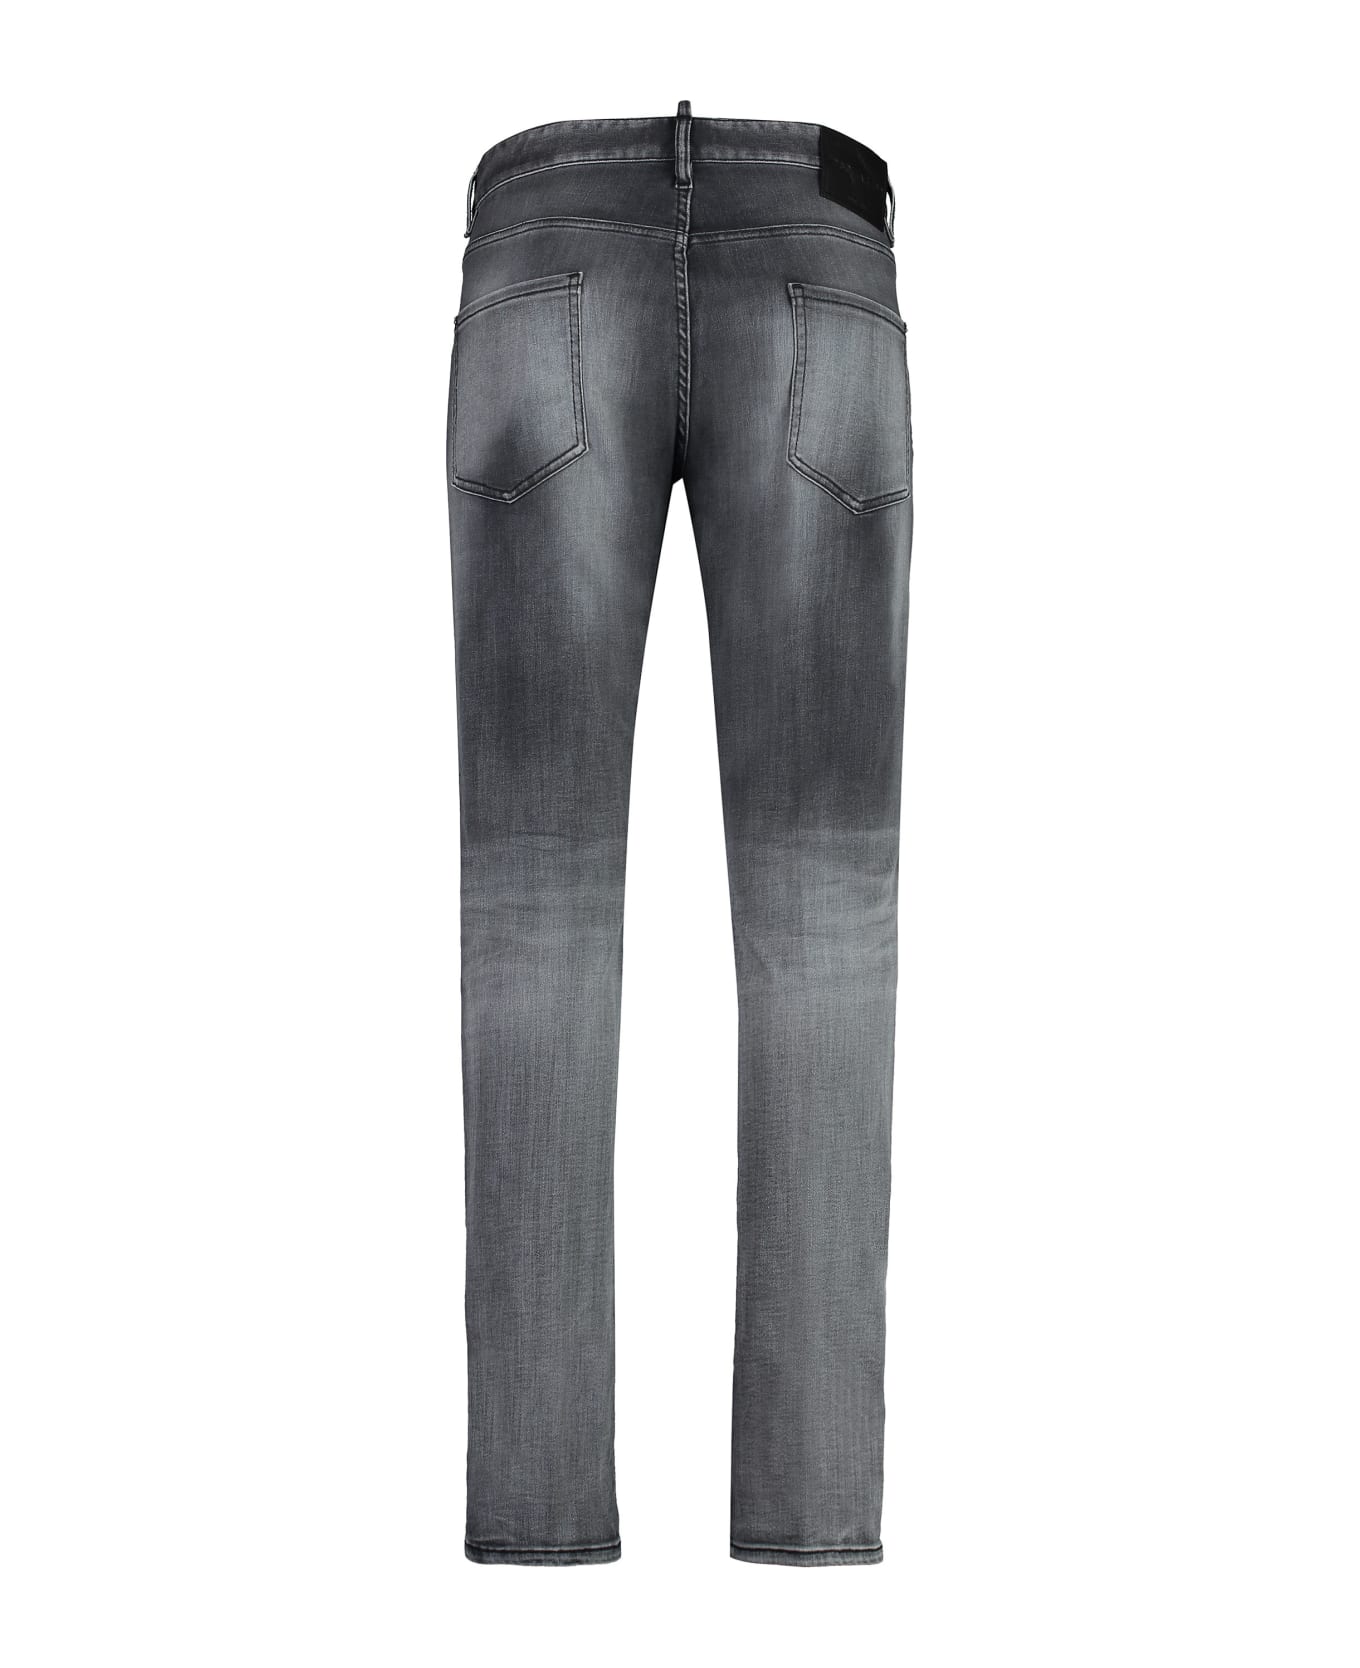 Dsquared2 Cool Guy Jeans - grey デニム